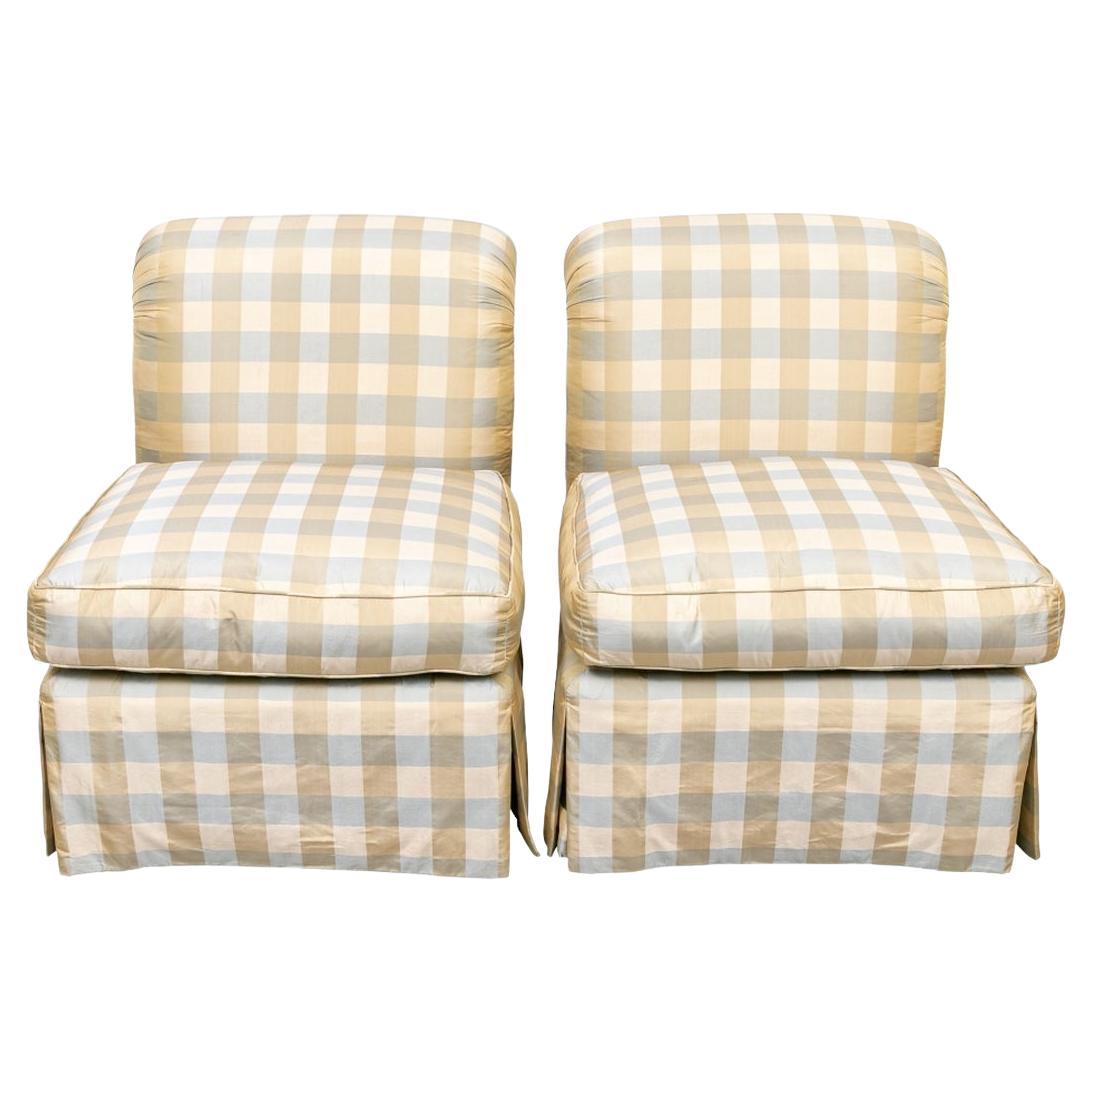 Pair of Elegant Slipper Chairs by the Cameron Collection, Dallas For Sale